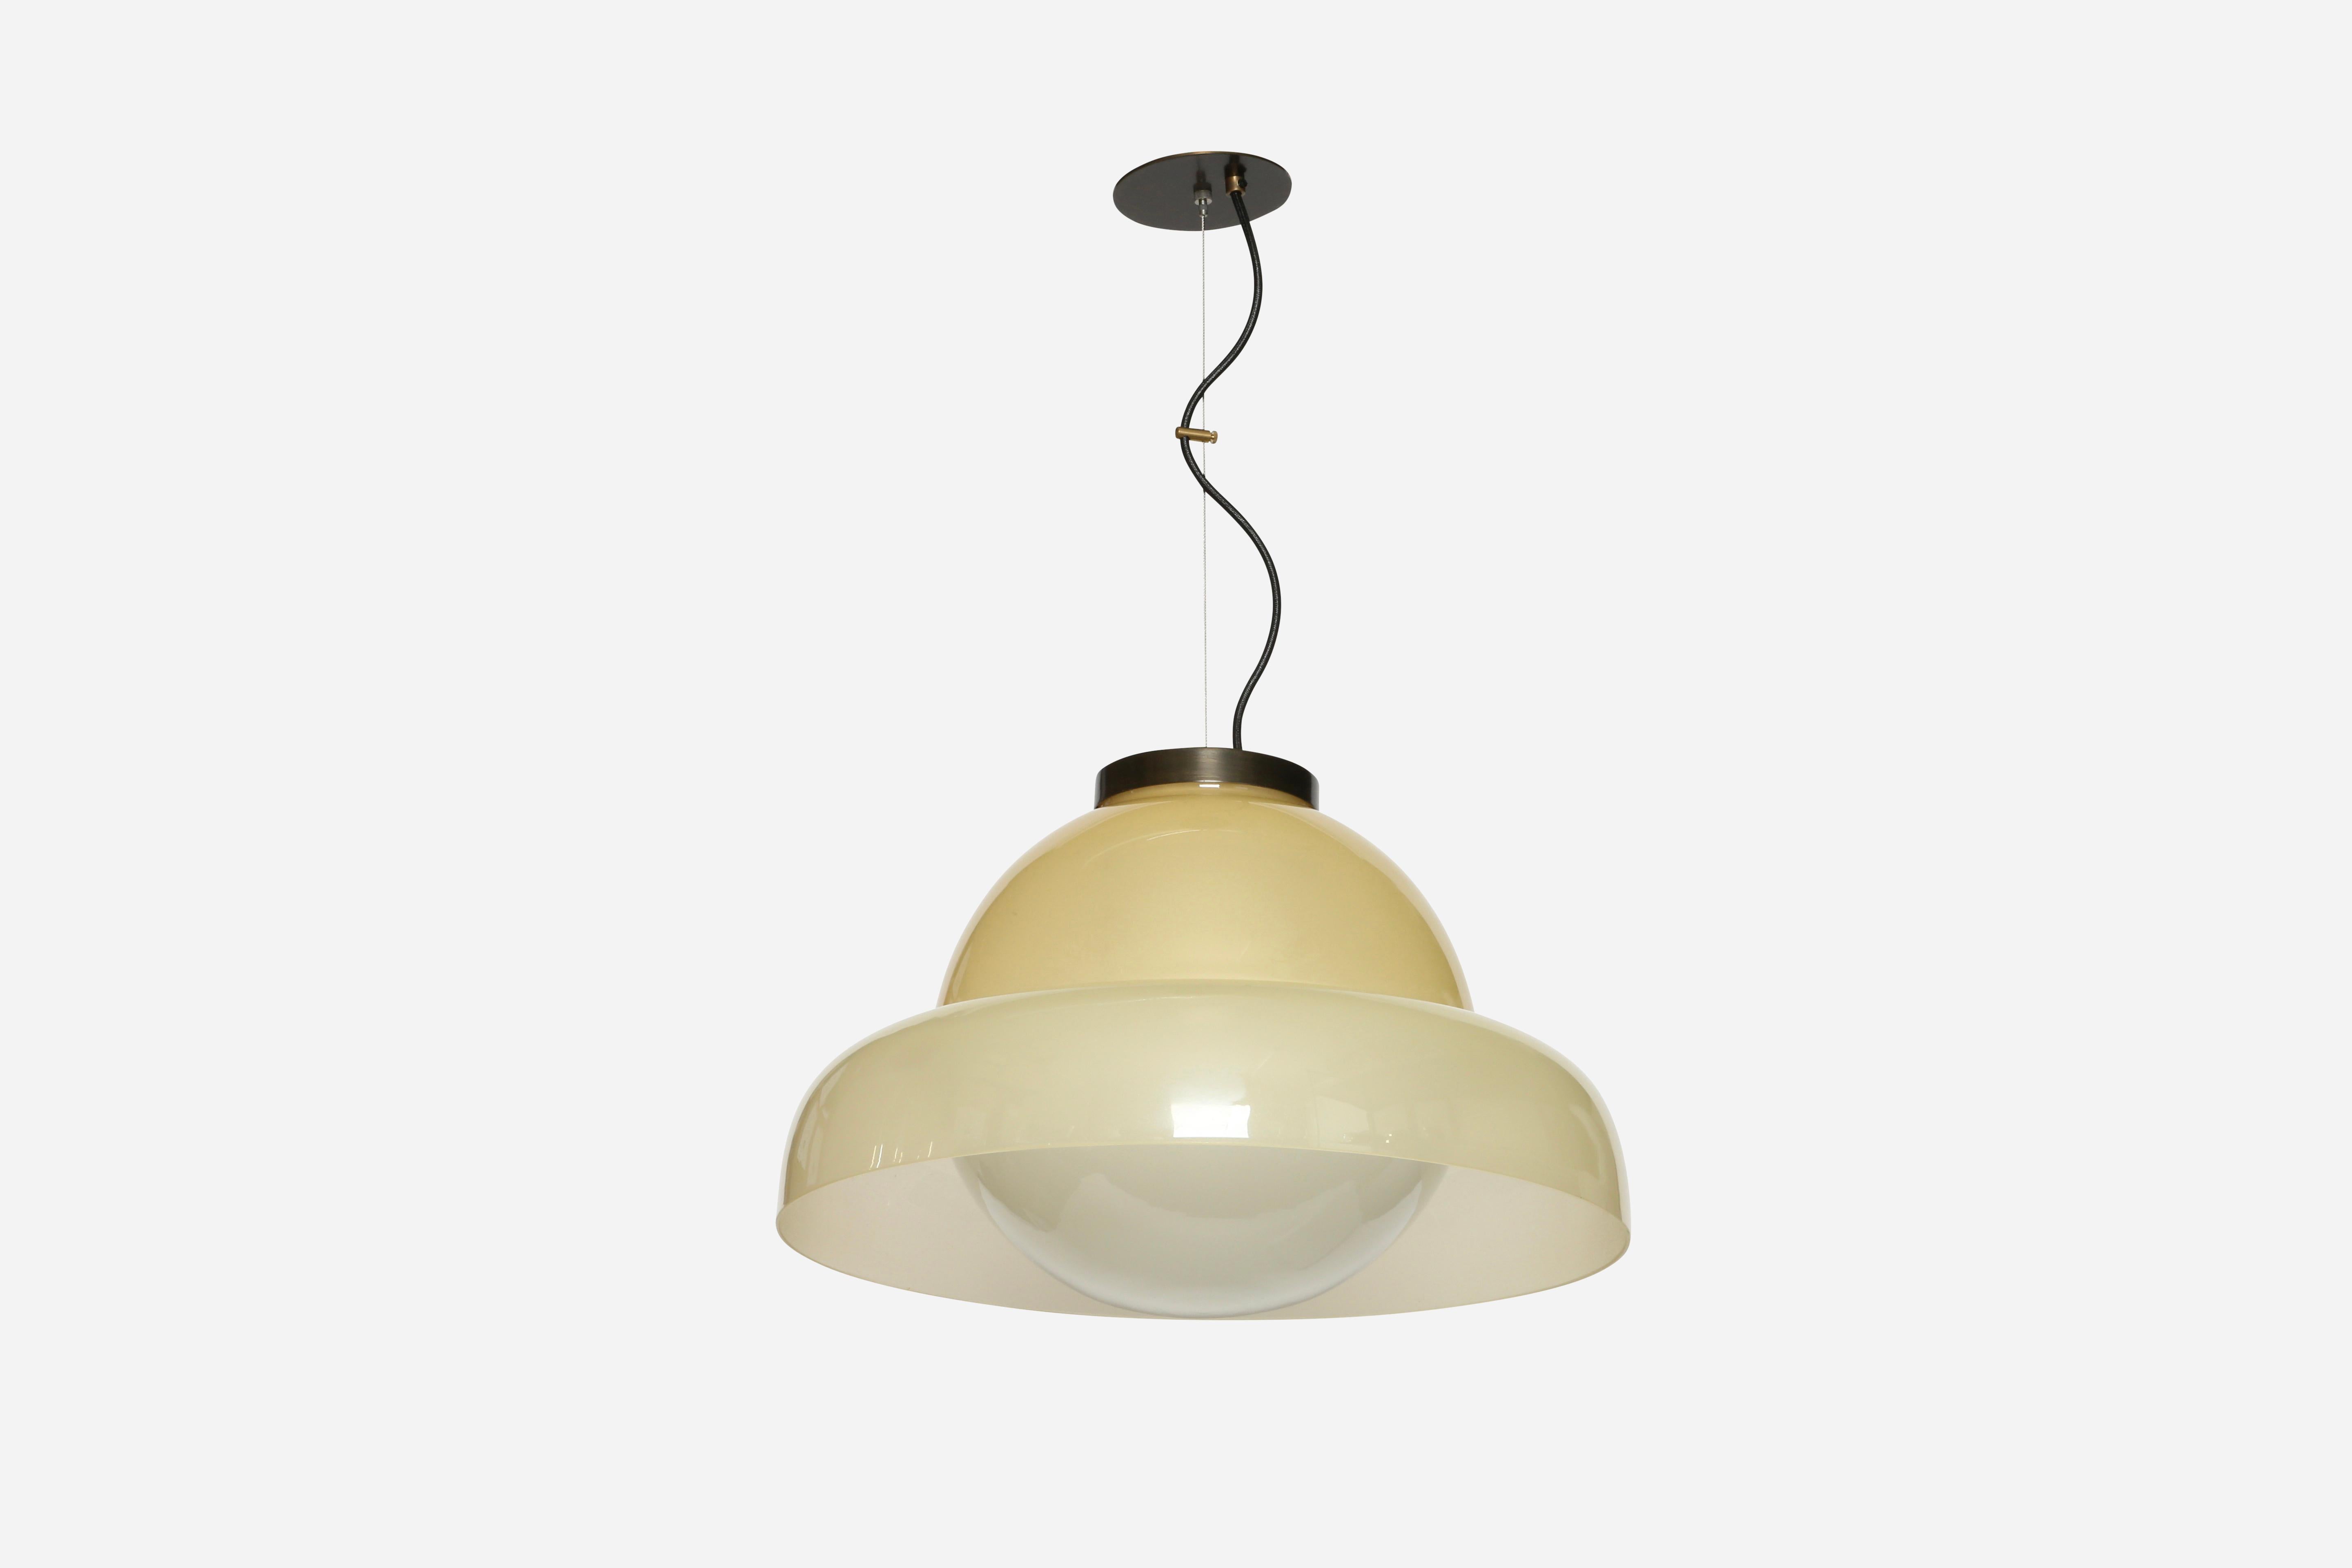 Murano glass ceiling pendant by Vistosi.
Murano glass in two colors. Translucent light cream yellow on the outside and opaline white on the inside.
Rewired for the US.
Takes one medium base bulb.
Overall drop is adjustable, cord can be made shorter